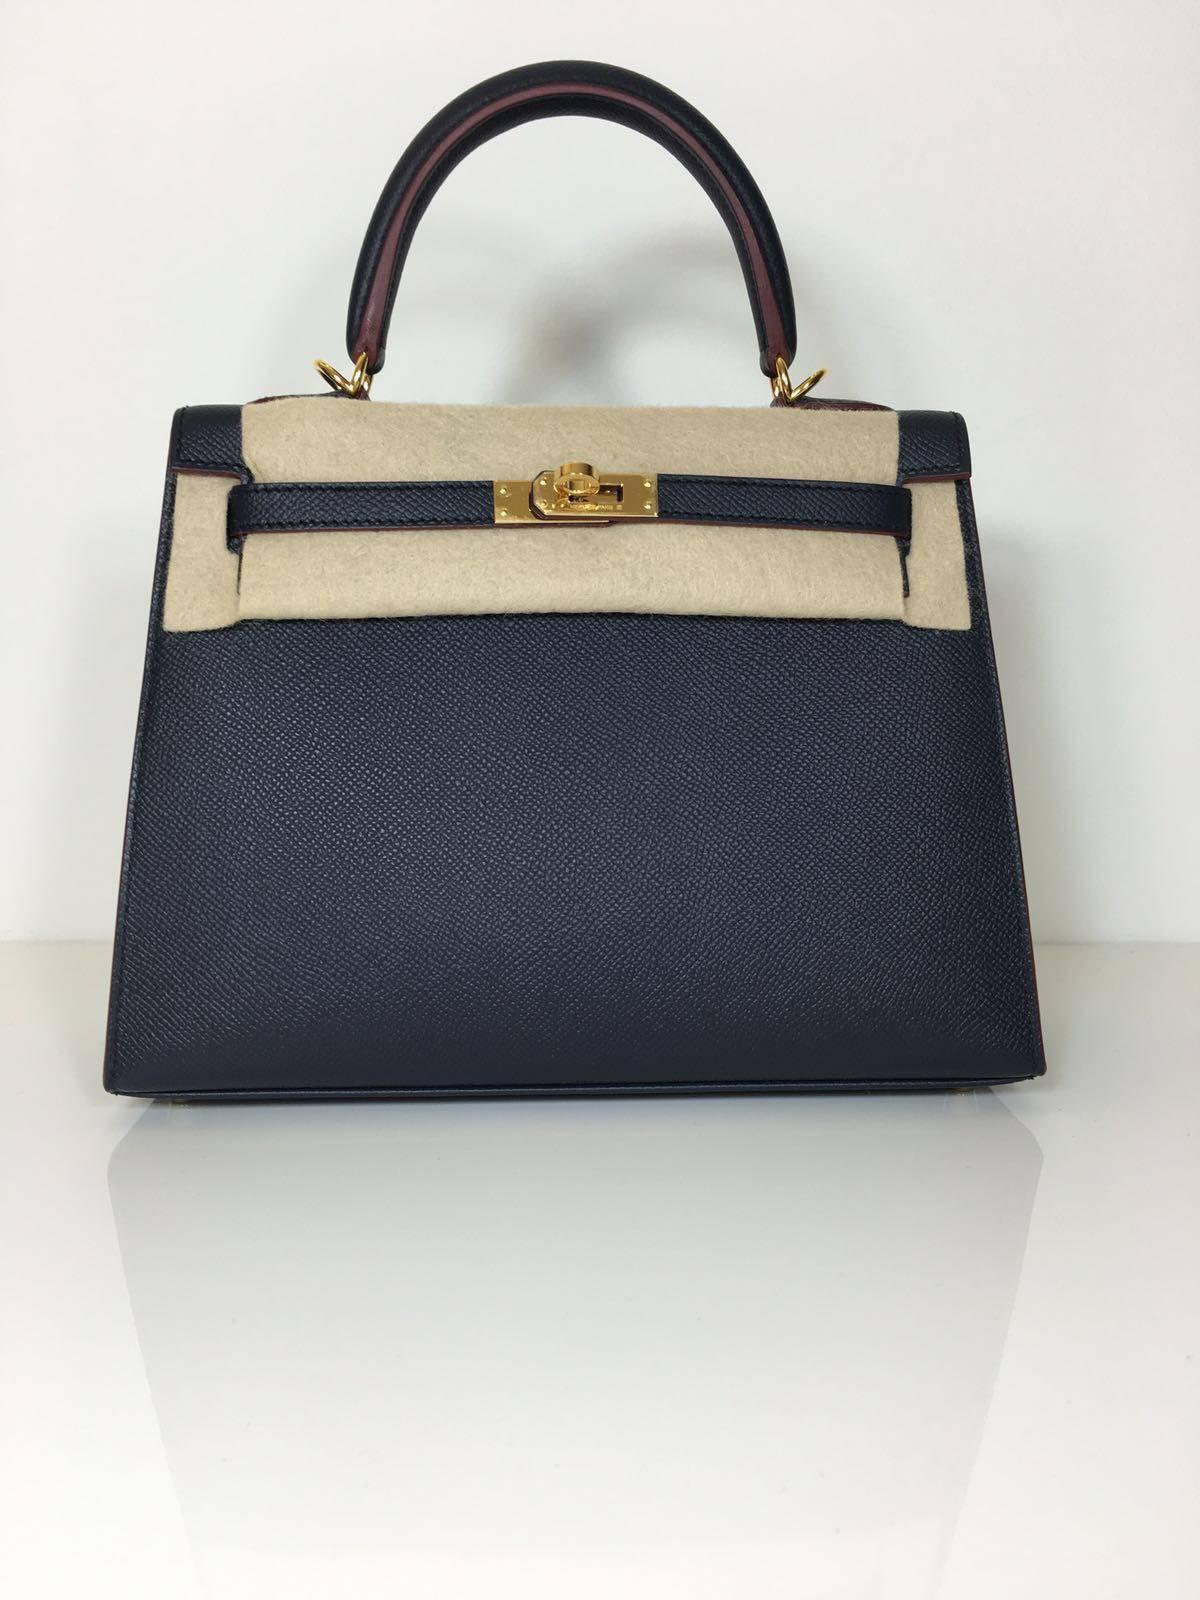 Hermes Limited edition
Kelly size 25 
Epsom leather 
Colour indigo blue/ red (wax, outlines) 
gold hardware 
store fresh, comes with receipt and full set (dust bag, box...) 
Hydeparkfashion specializes in sourcing and delivering authentic